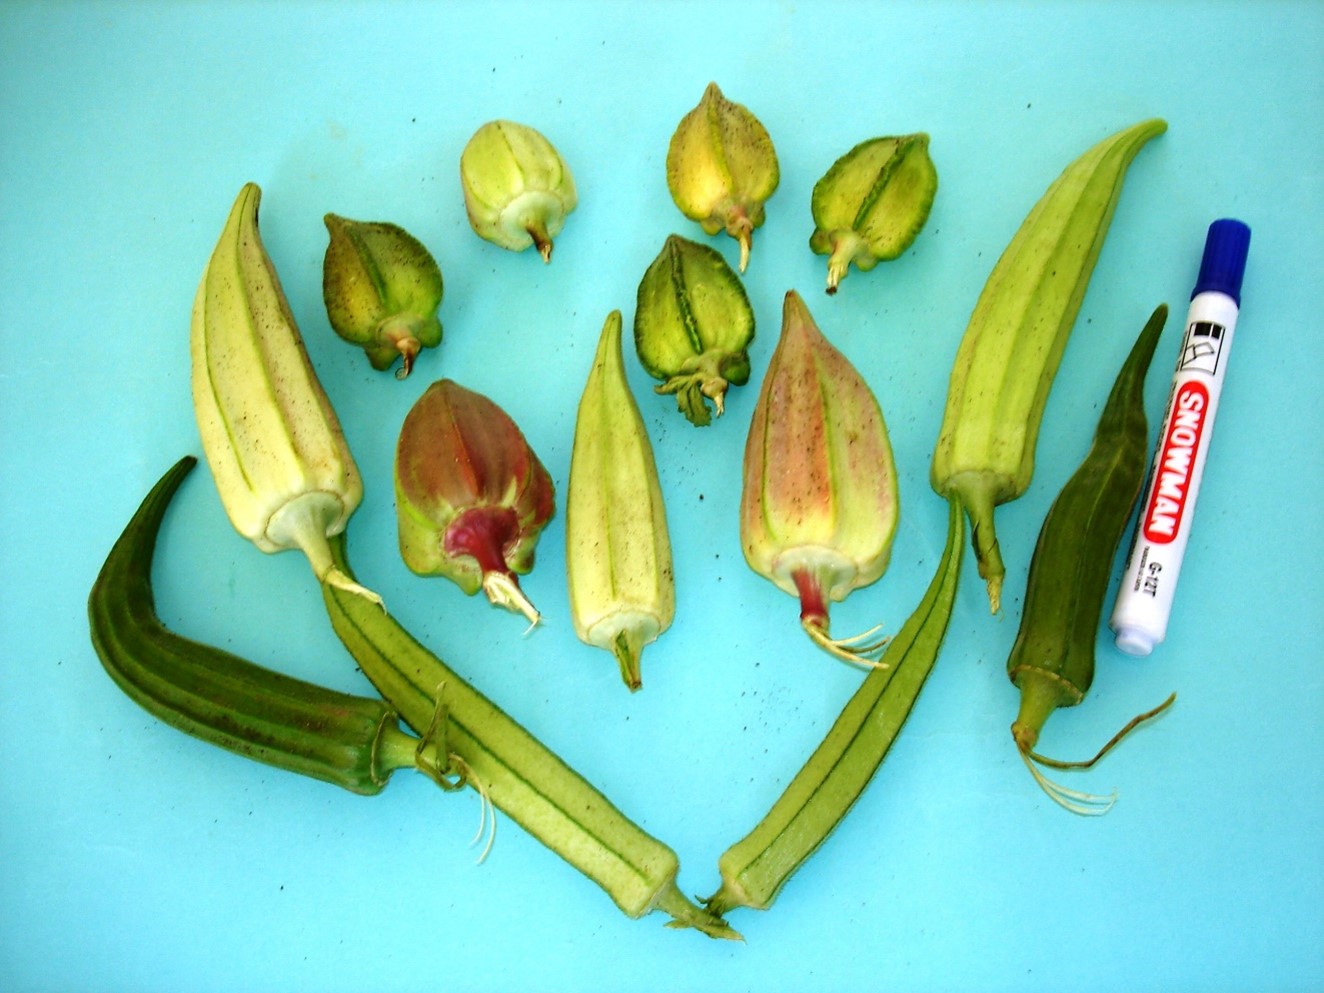 Variations in size, colour and shape of okra accessions